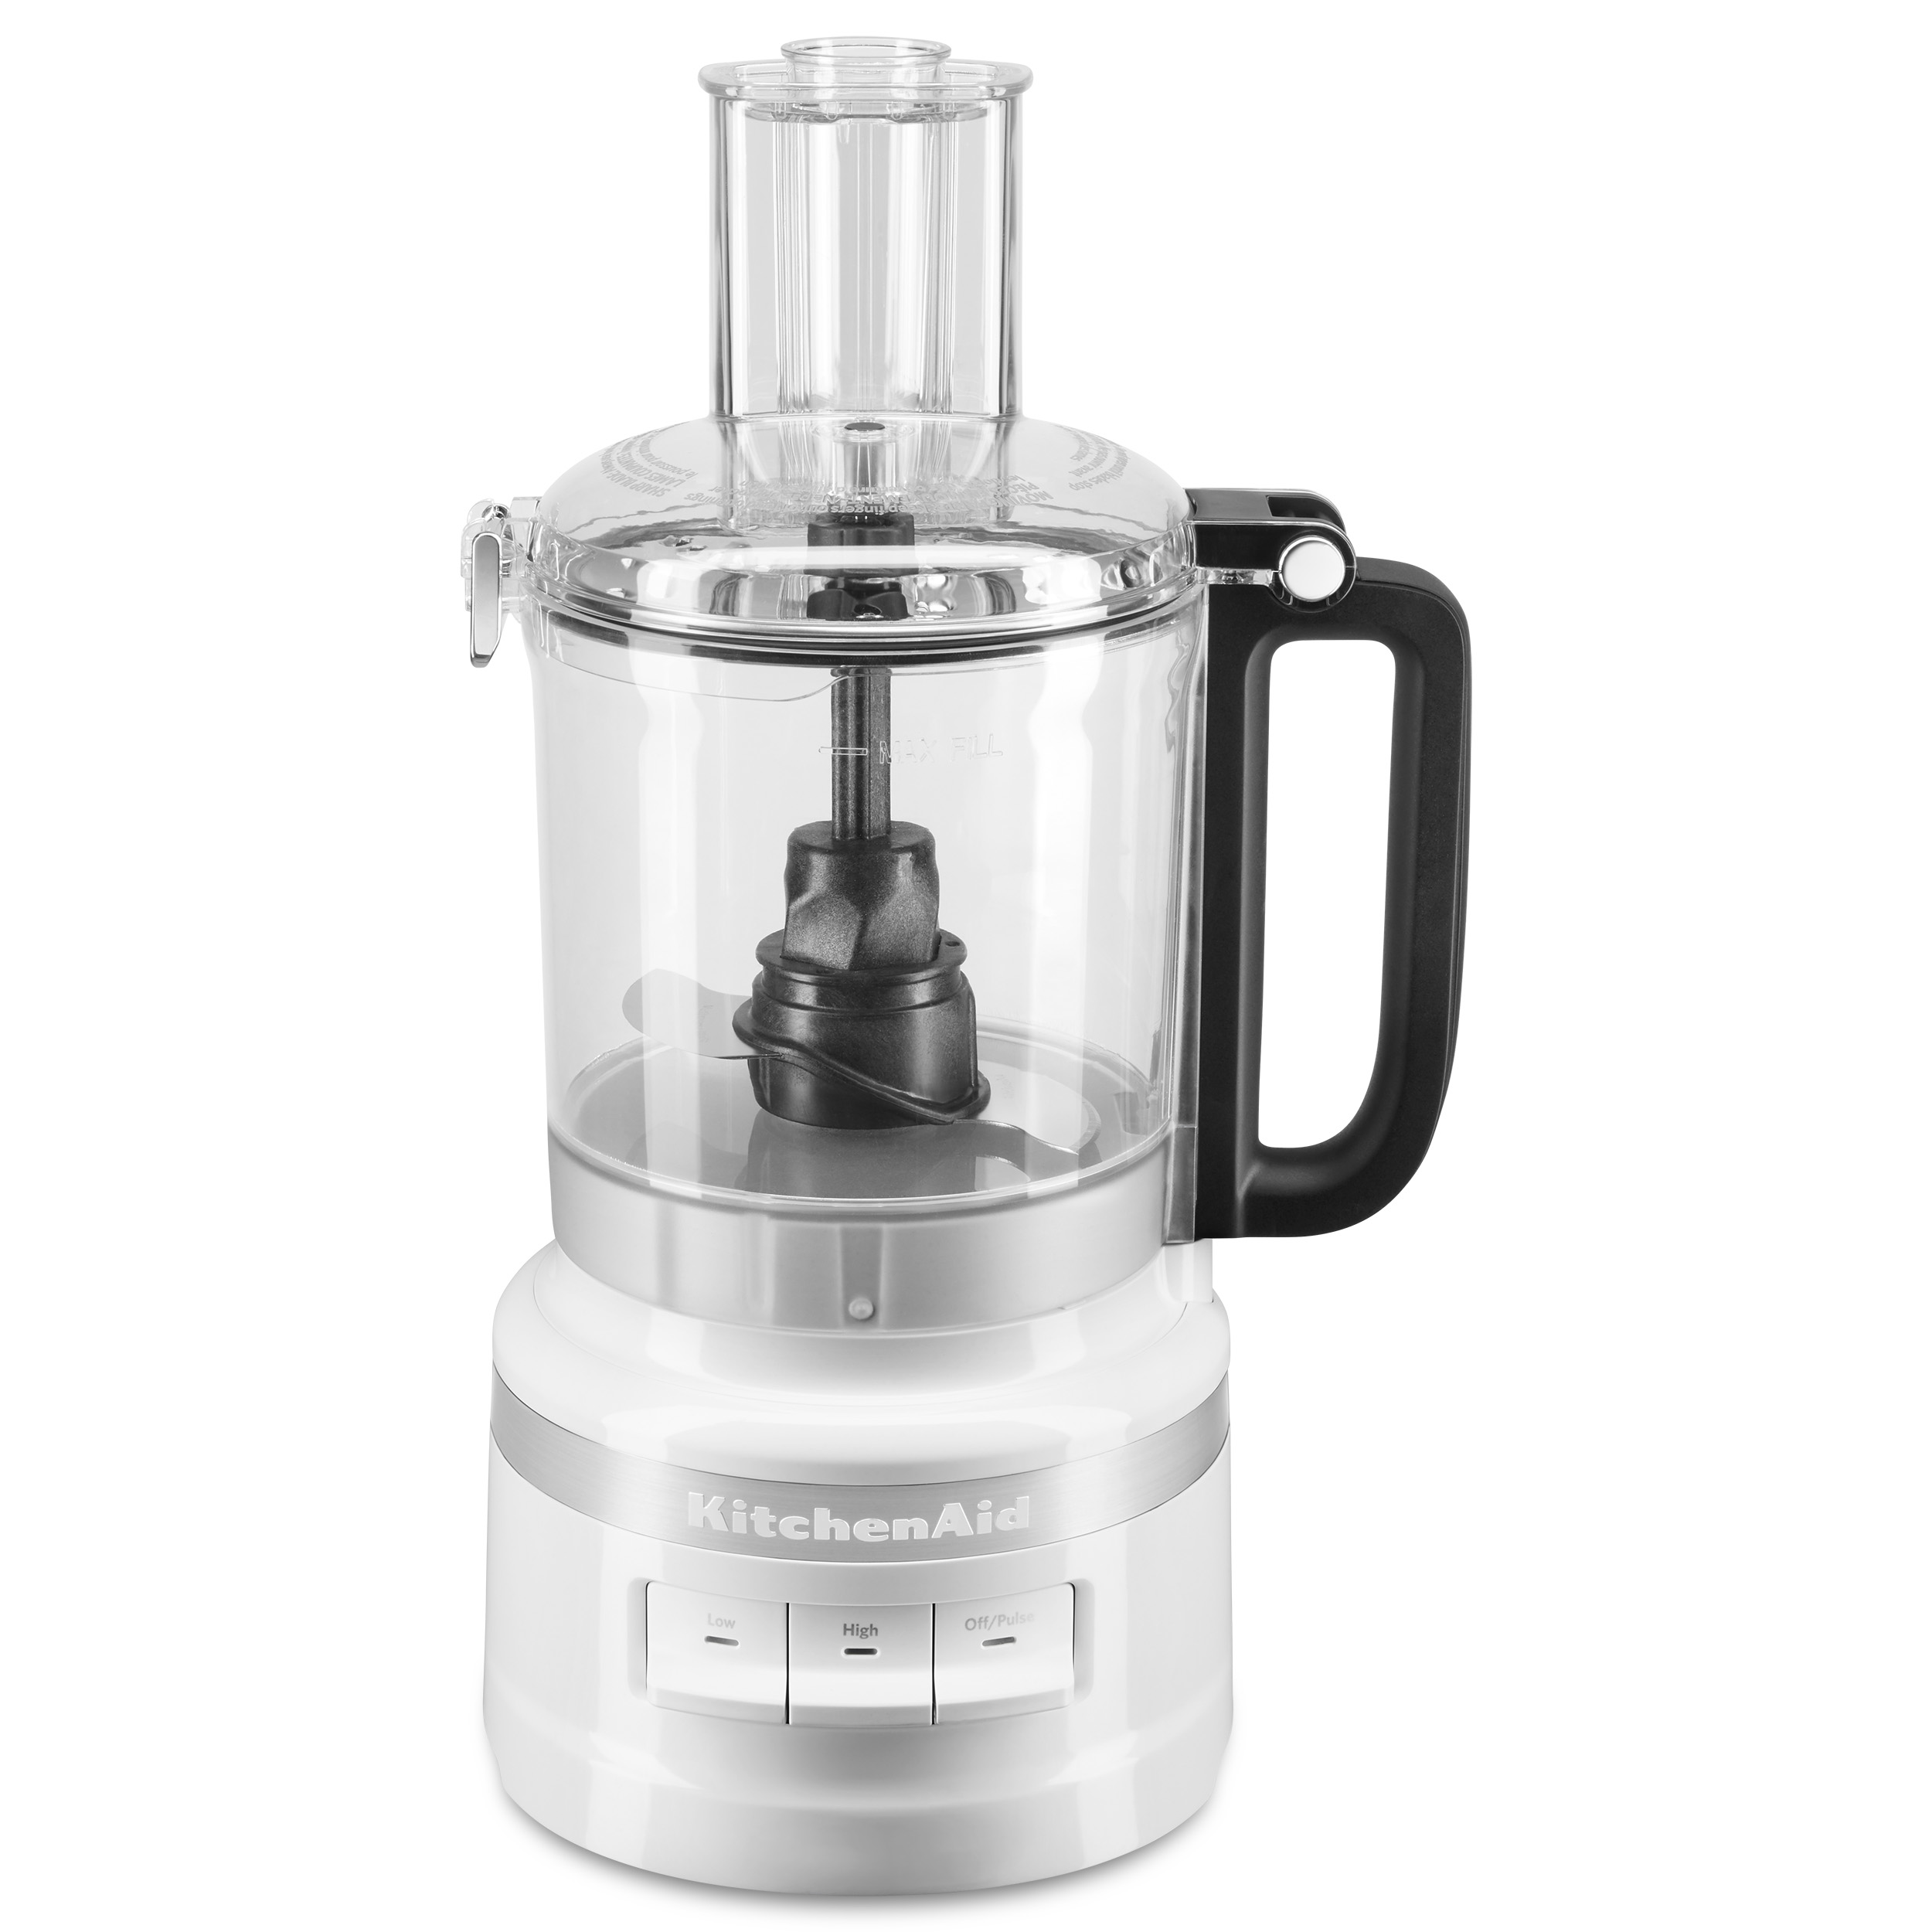 KitchenAid KFP0918WH 9 Cup Food Processor, White - image 1 of 7